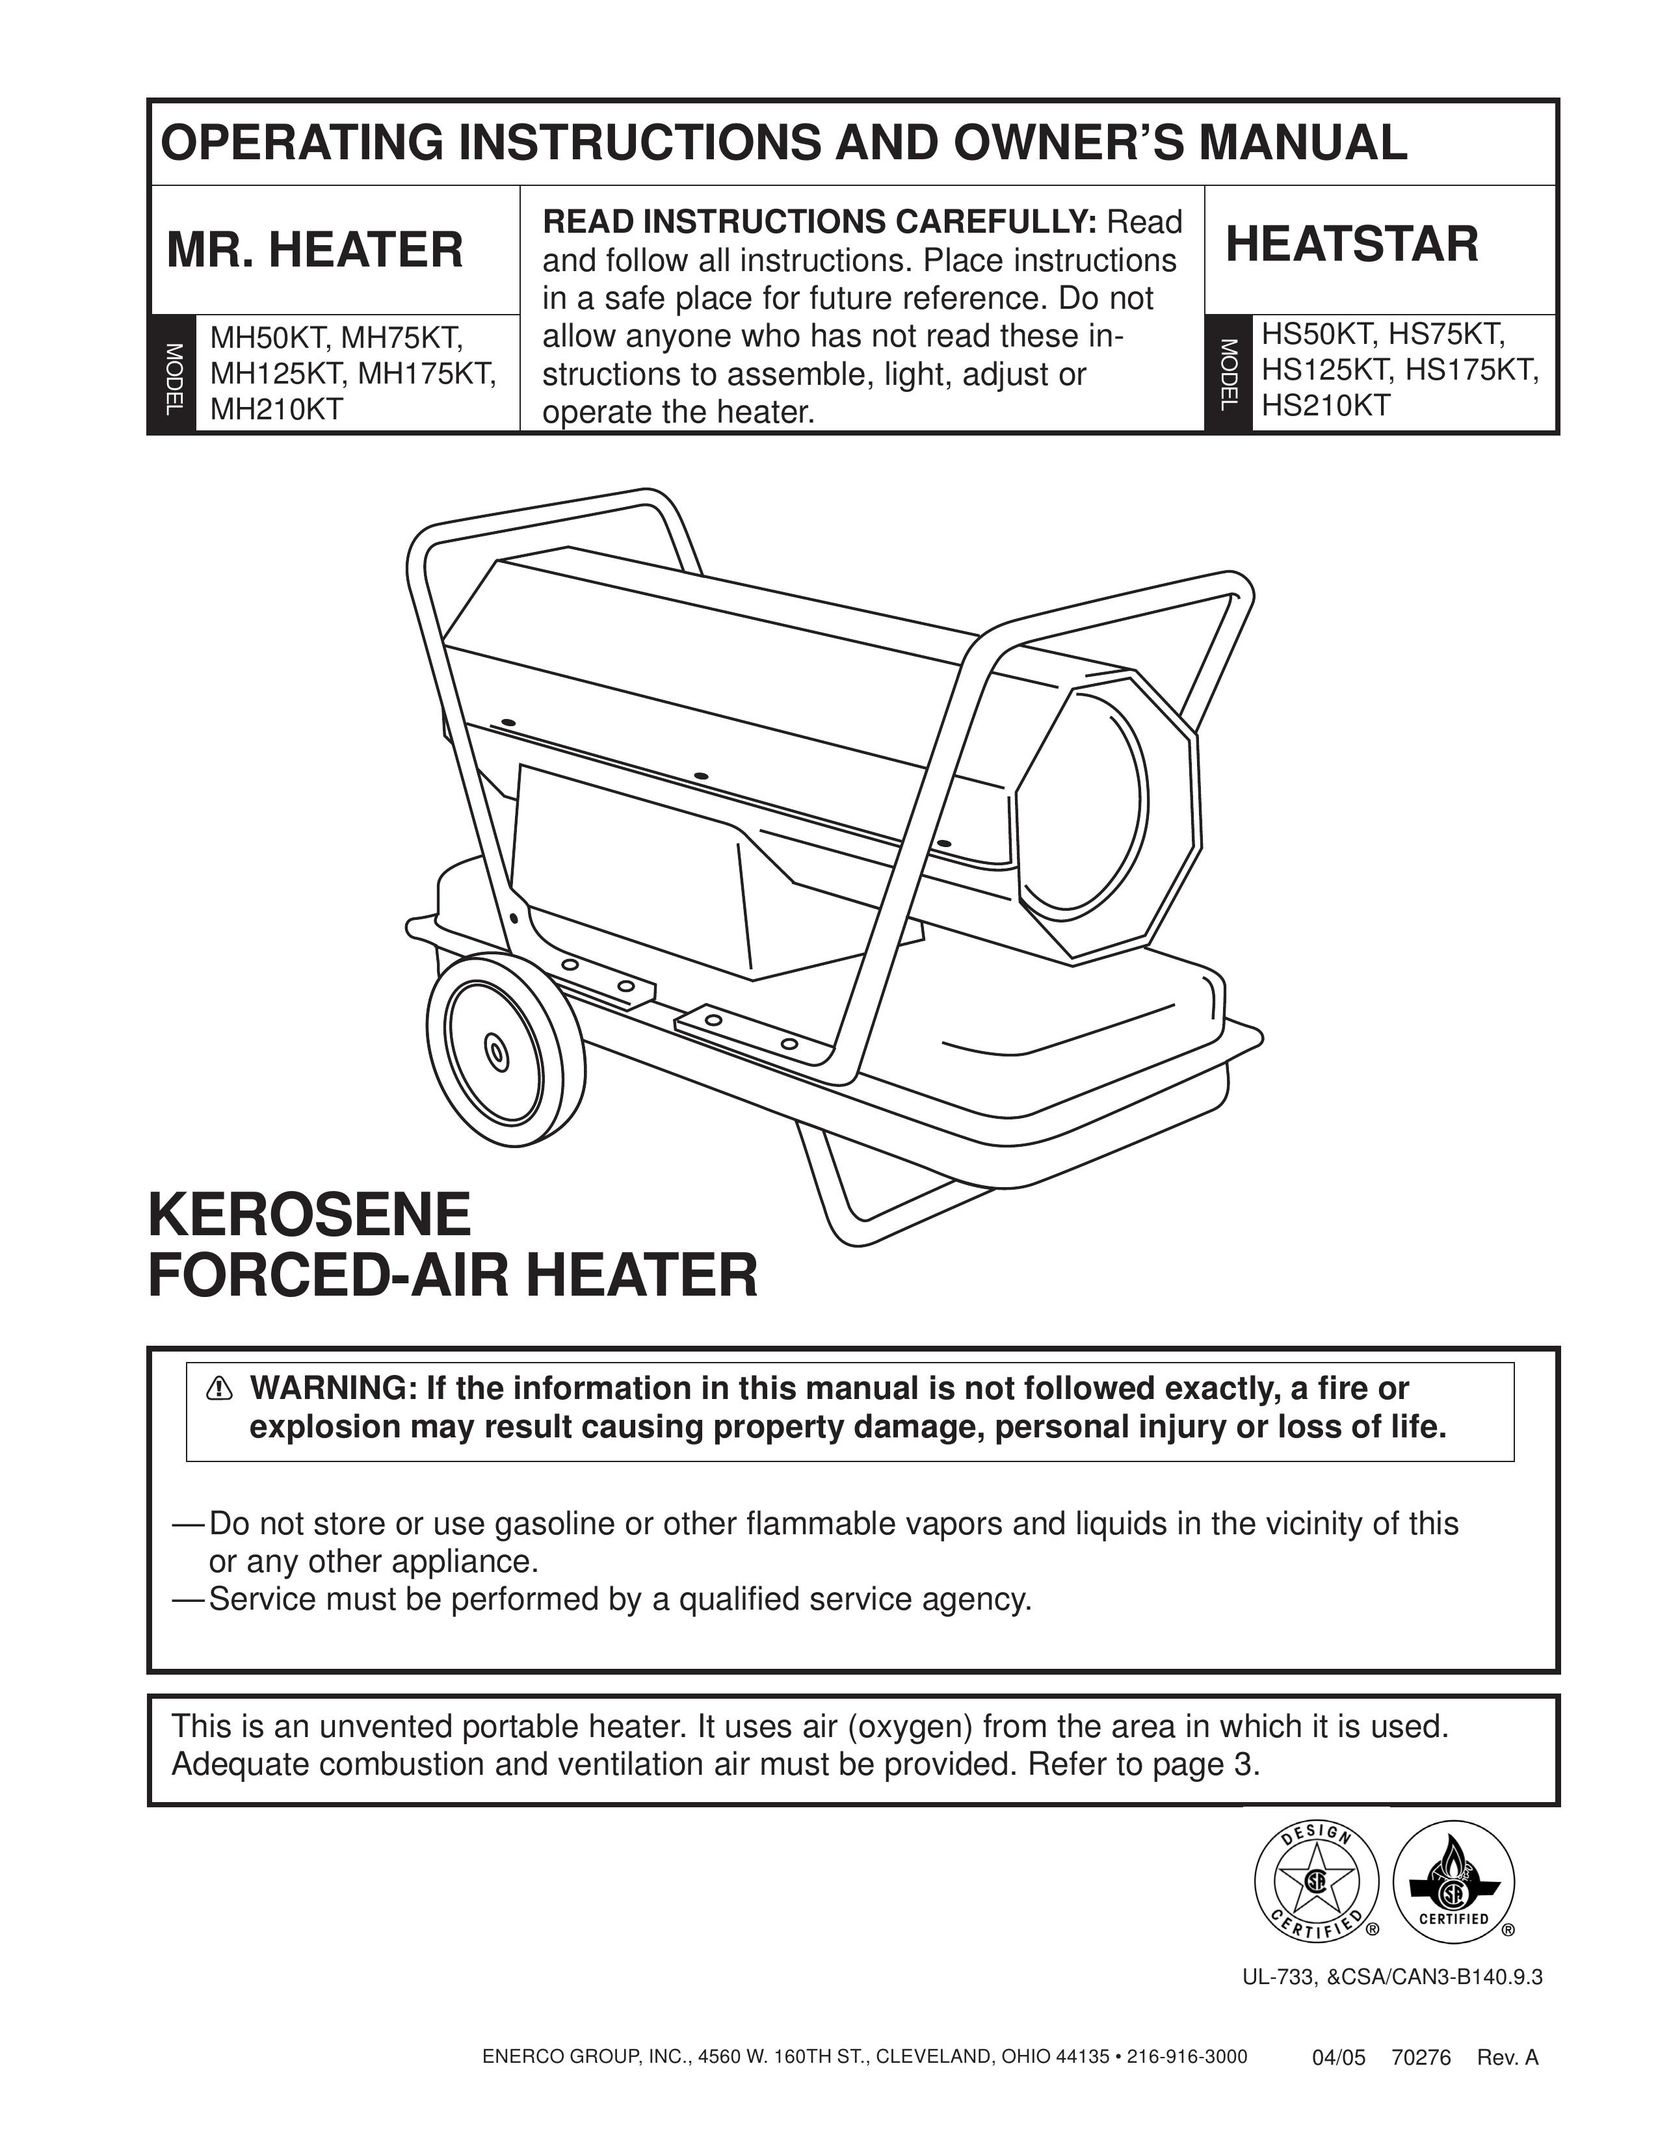 Enerco MH125KT Gas Heater User Manual